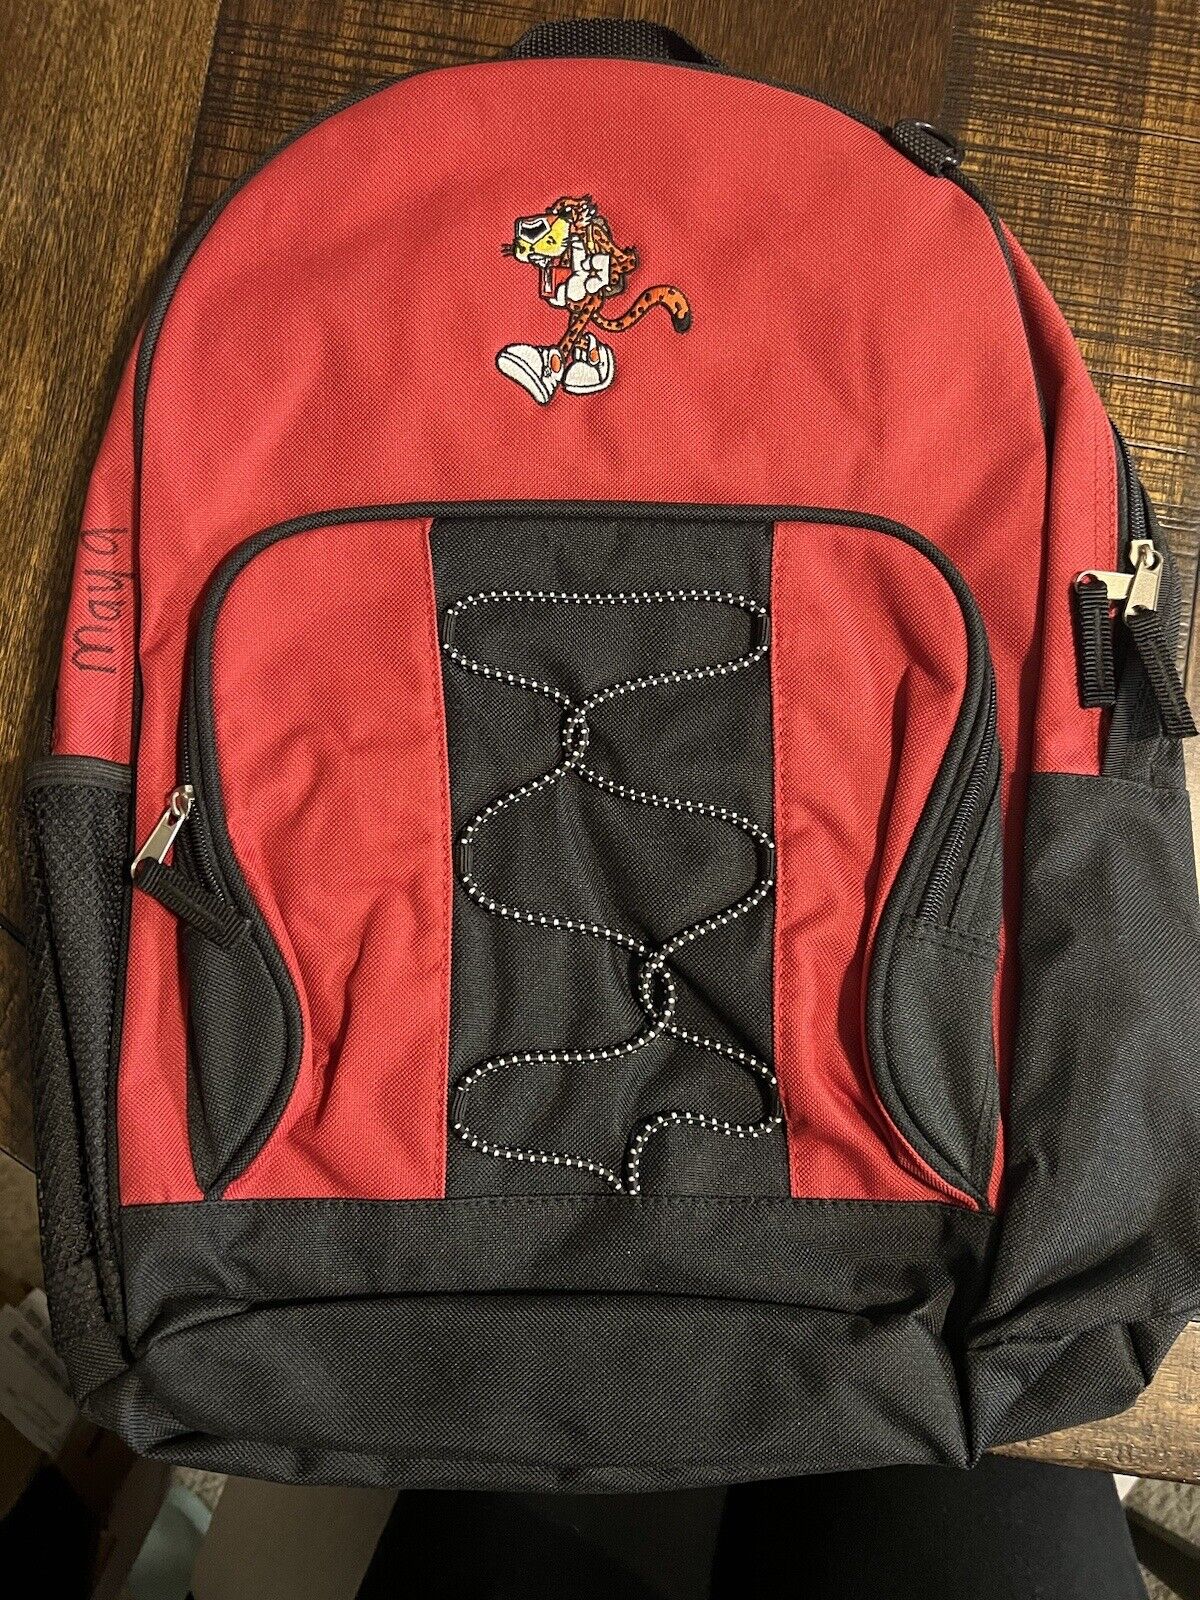 Vintage Cheeto Chester Cheetah Embroidered Backpack in Black/red